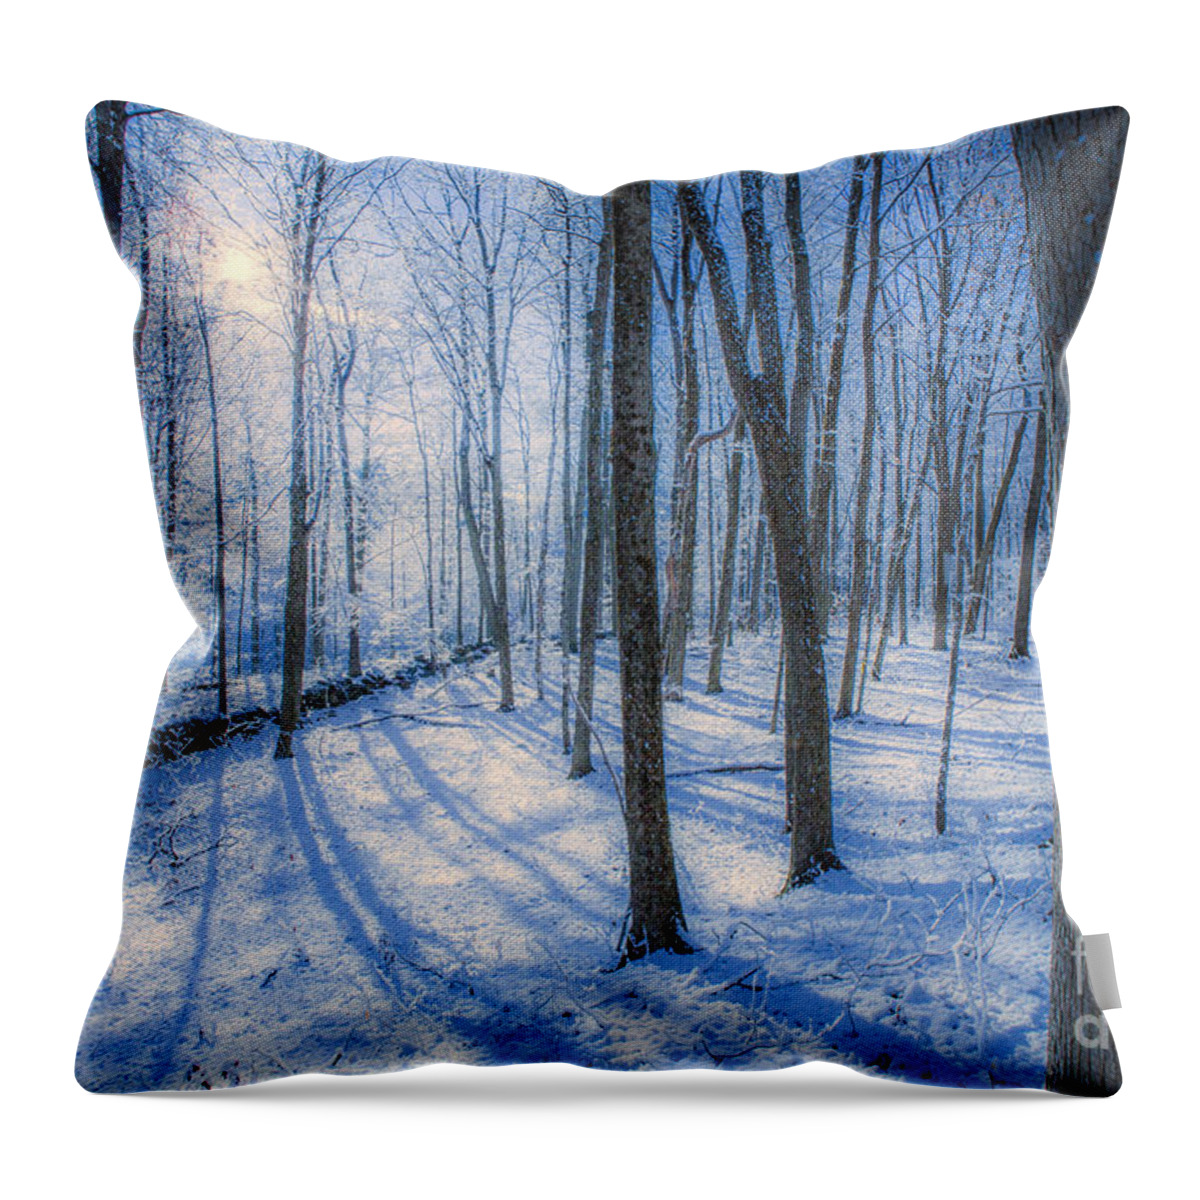 Snow Throw Pillow featuring the photograph Snowy New England Forest by Diane Diederich